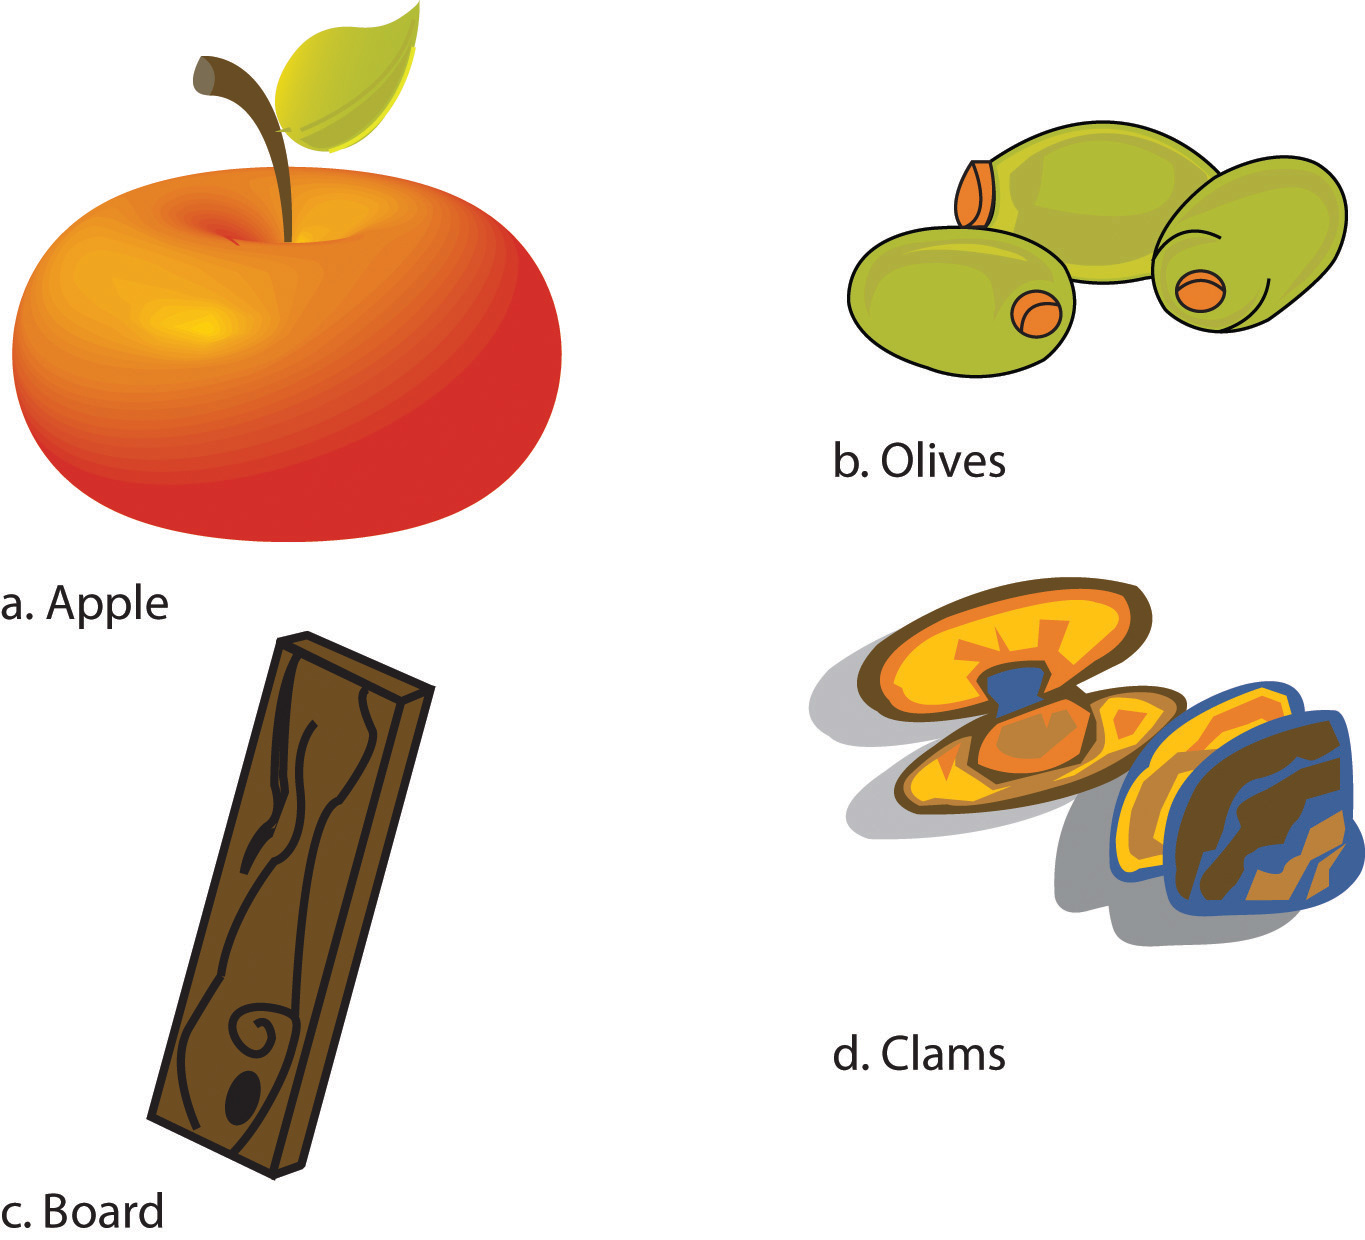 A collage of 4 items: a. Apple, b. Olives, c. Board, and d. Clams